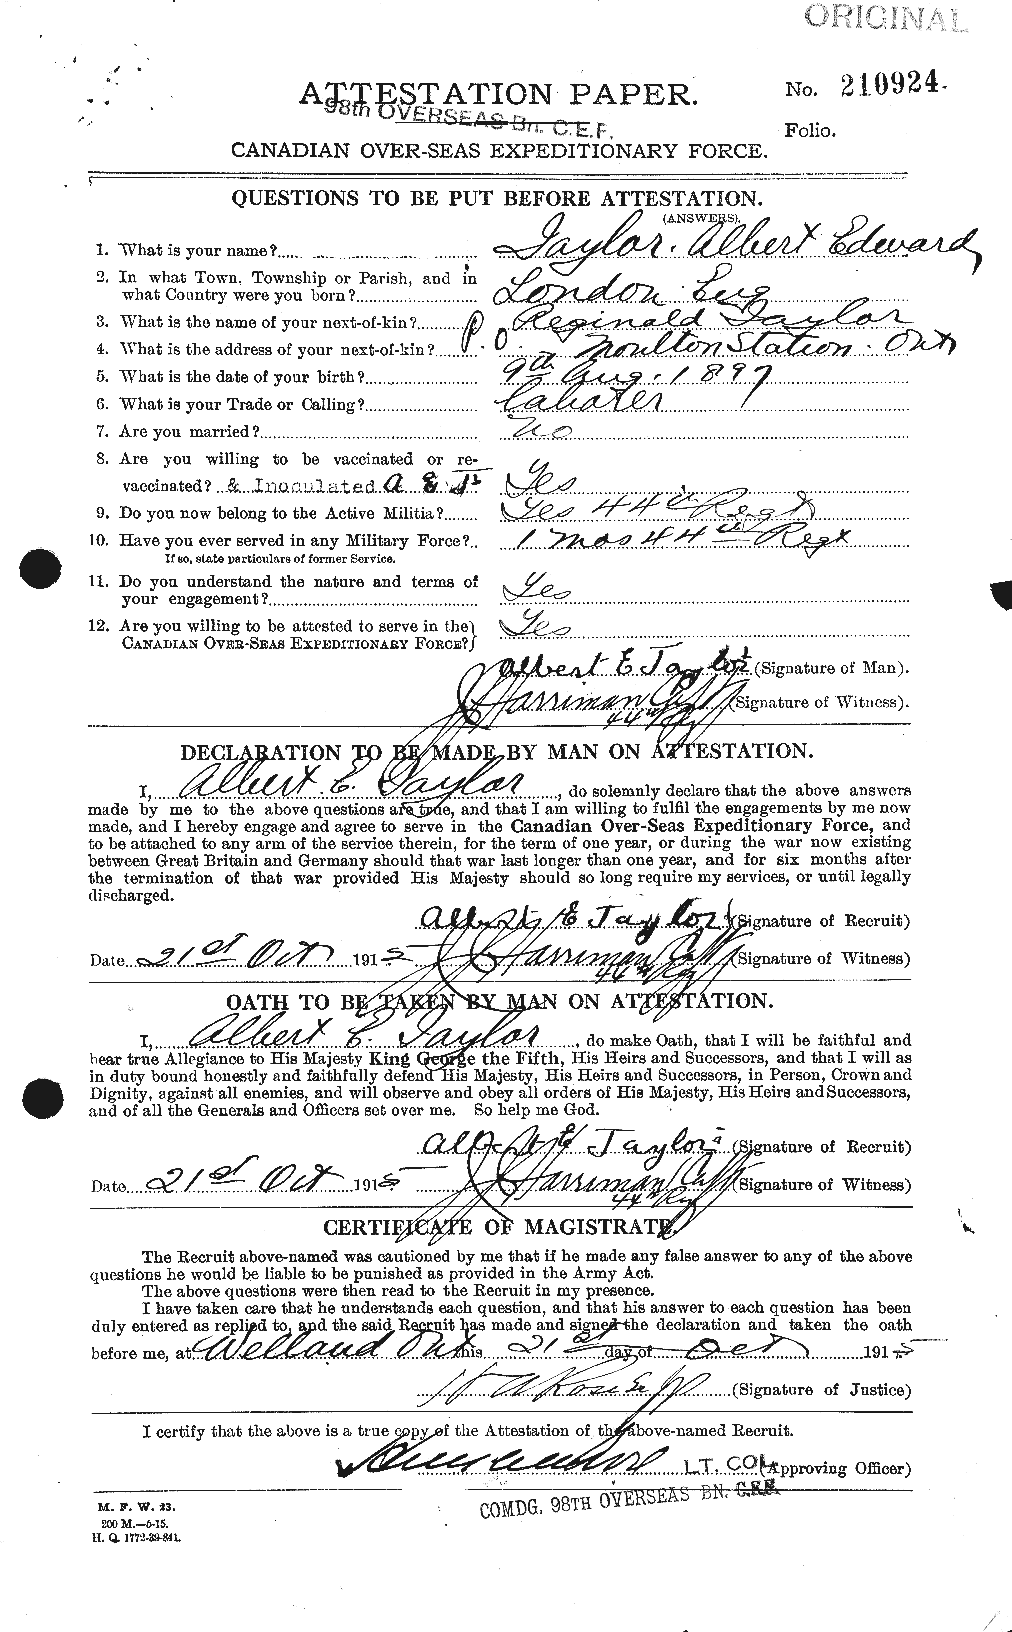 Personnel Records of the First World War - CEF 626106a